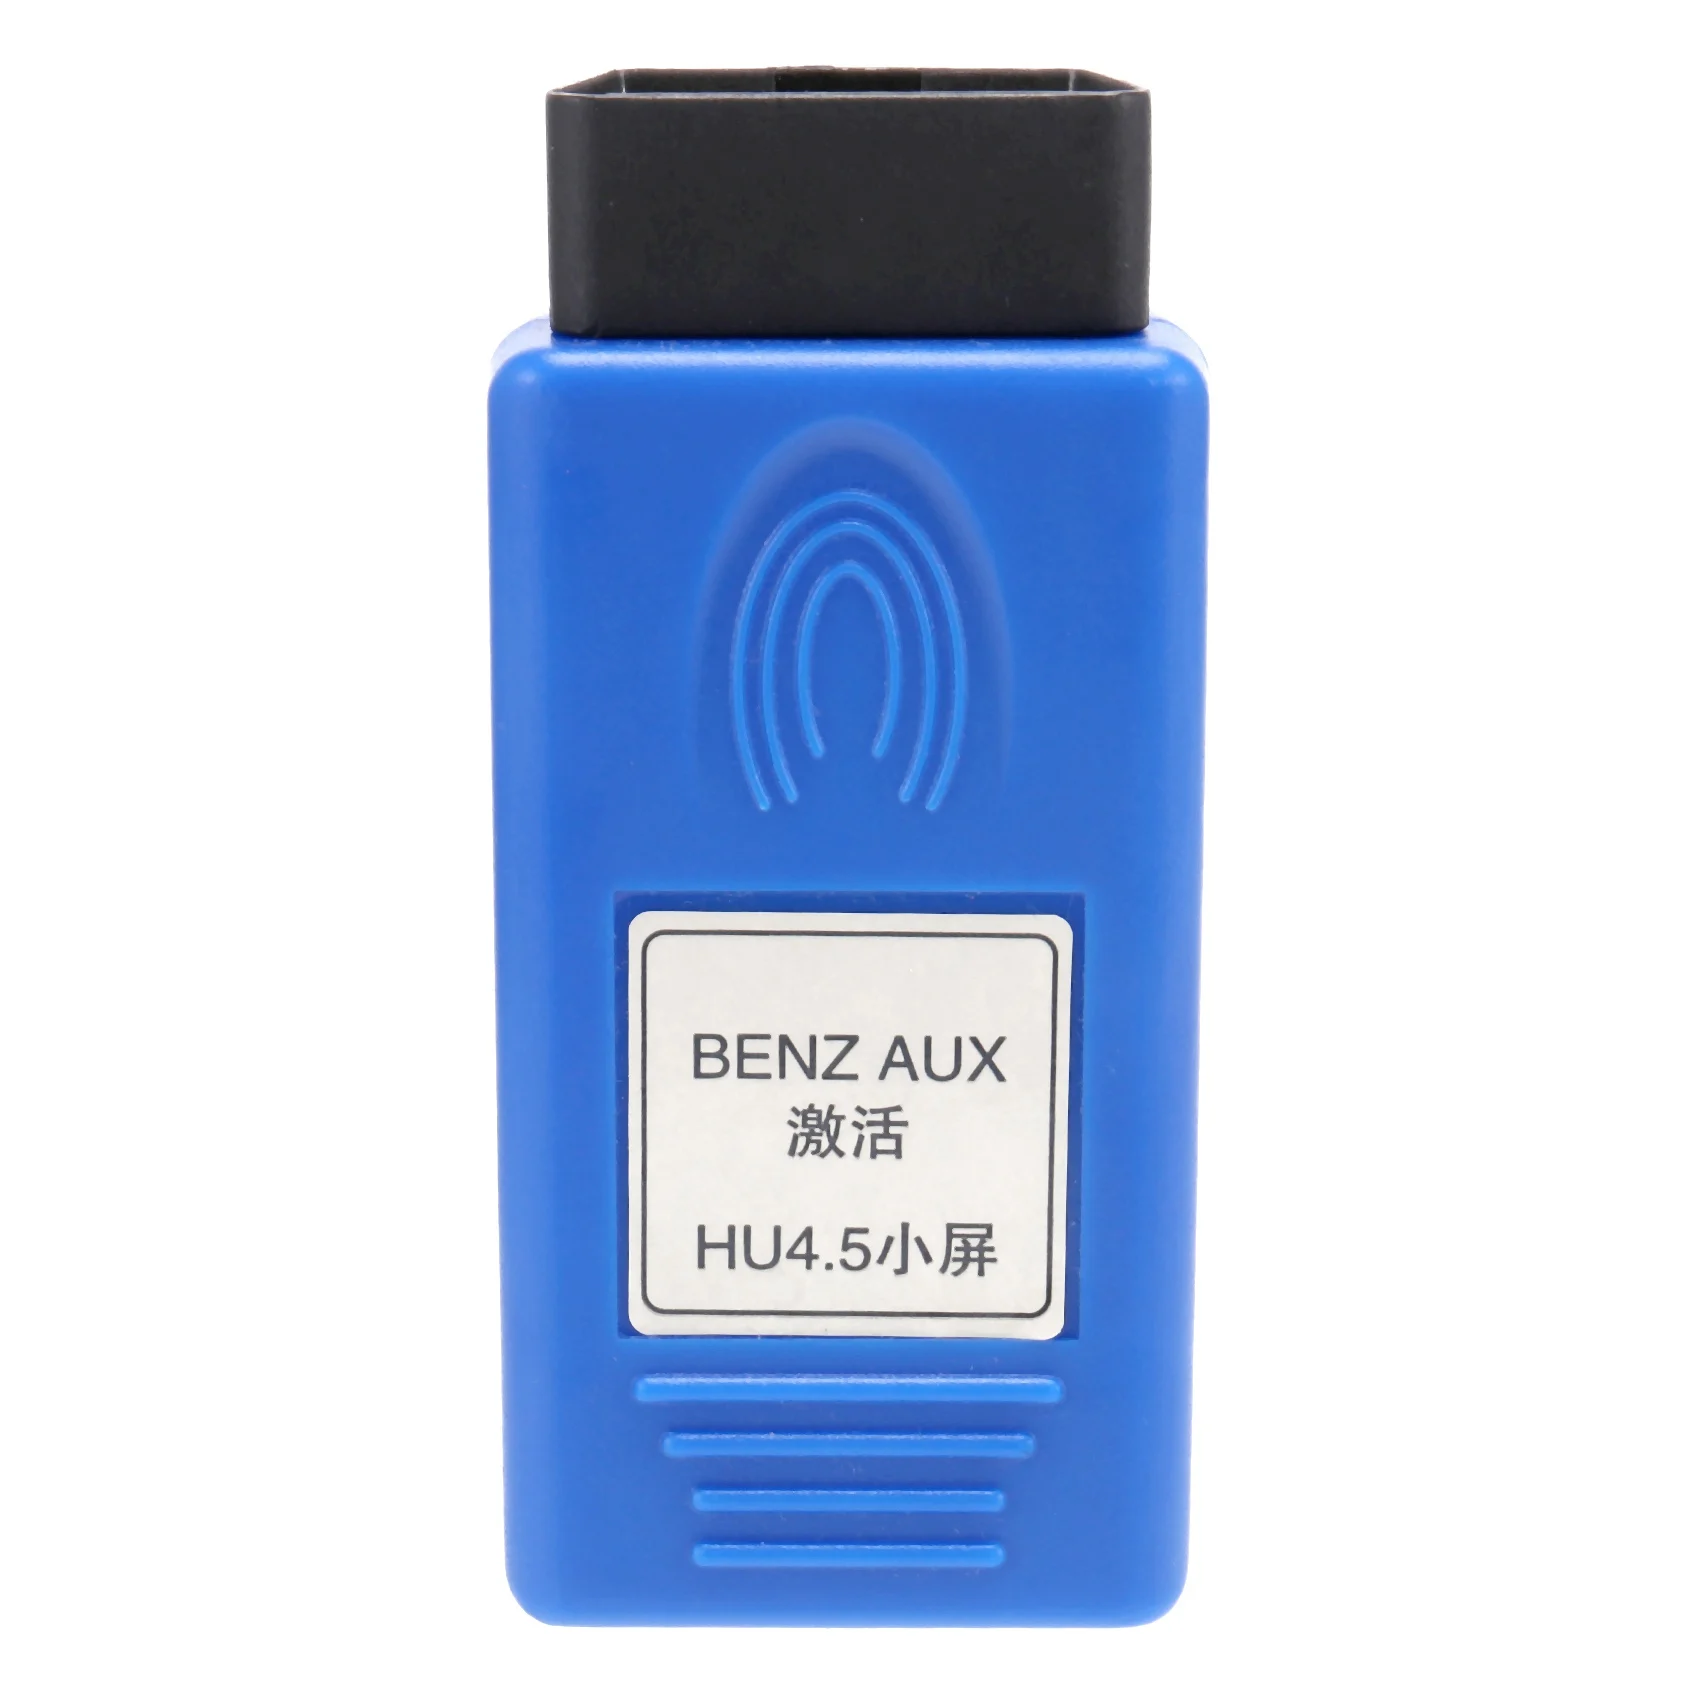 

NTG4.5 AUX Activator Tool for Benz GLC C A E GLA W205 X253 W222 W447 OBD AUX & VIM in Activator